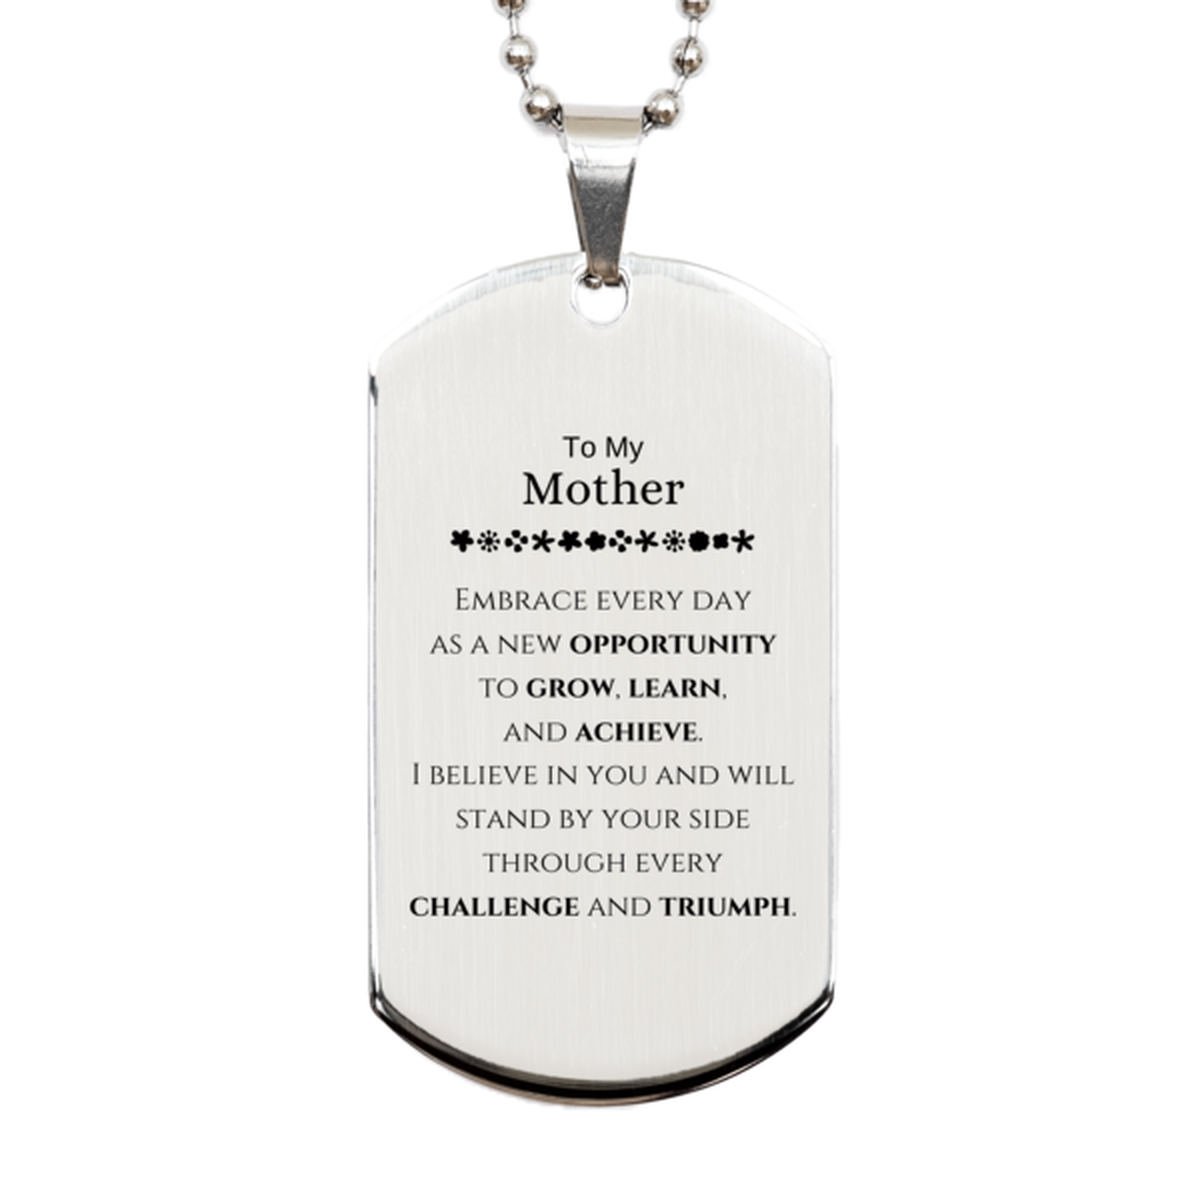 To My Mother Gifts, I believe in you and will stand by your side, Inspirational Silver Dog Tag For Mother, Birthday Christmas Motivational Mother Gifts